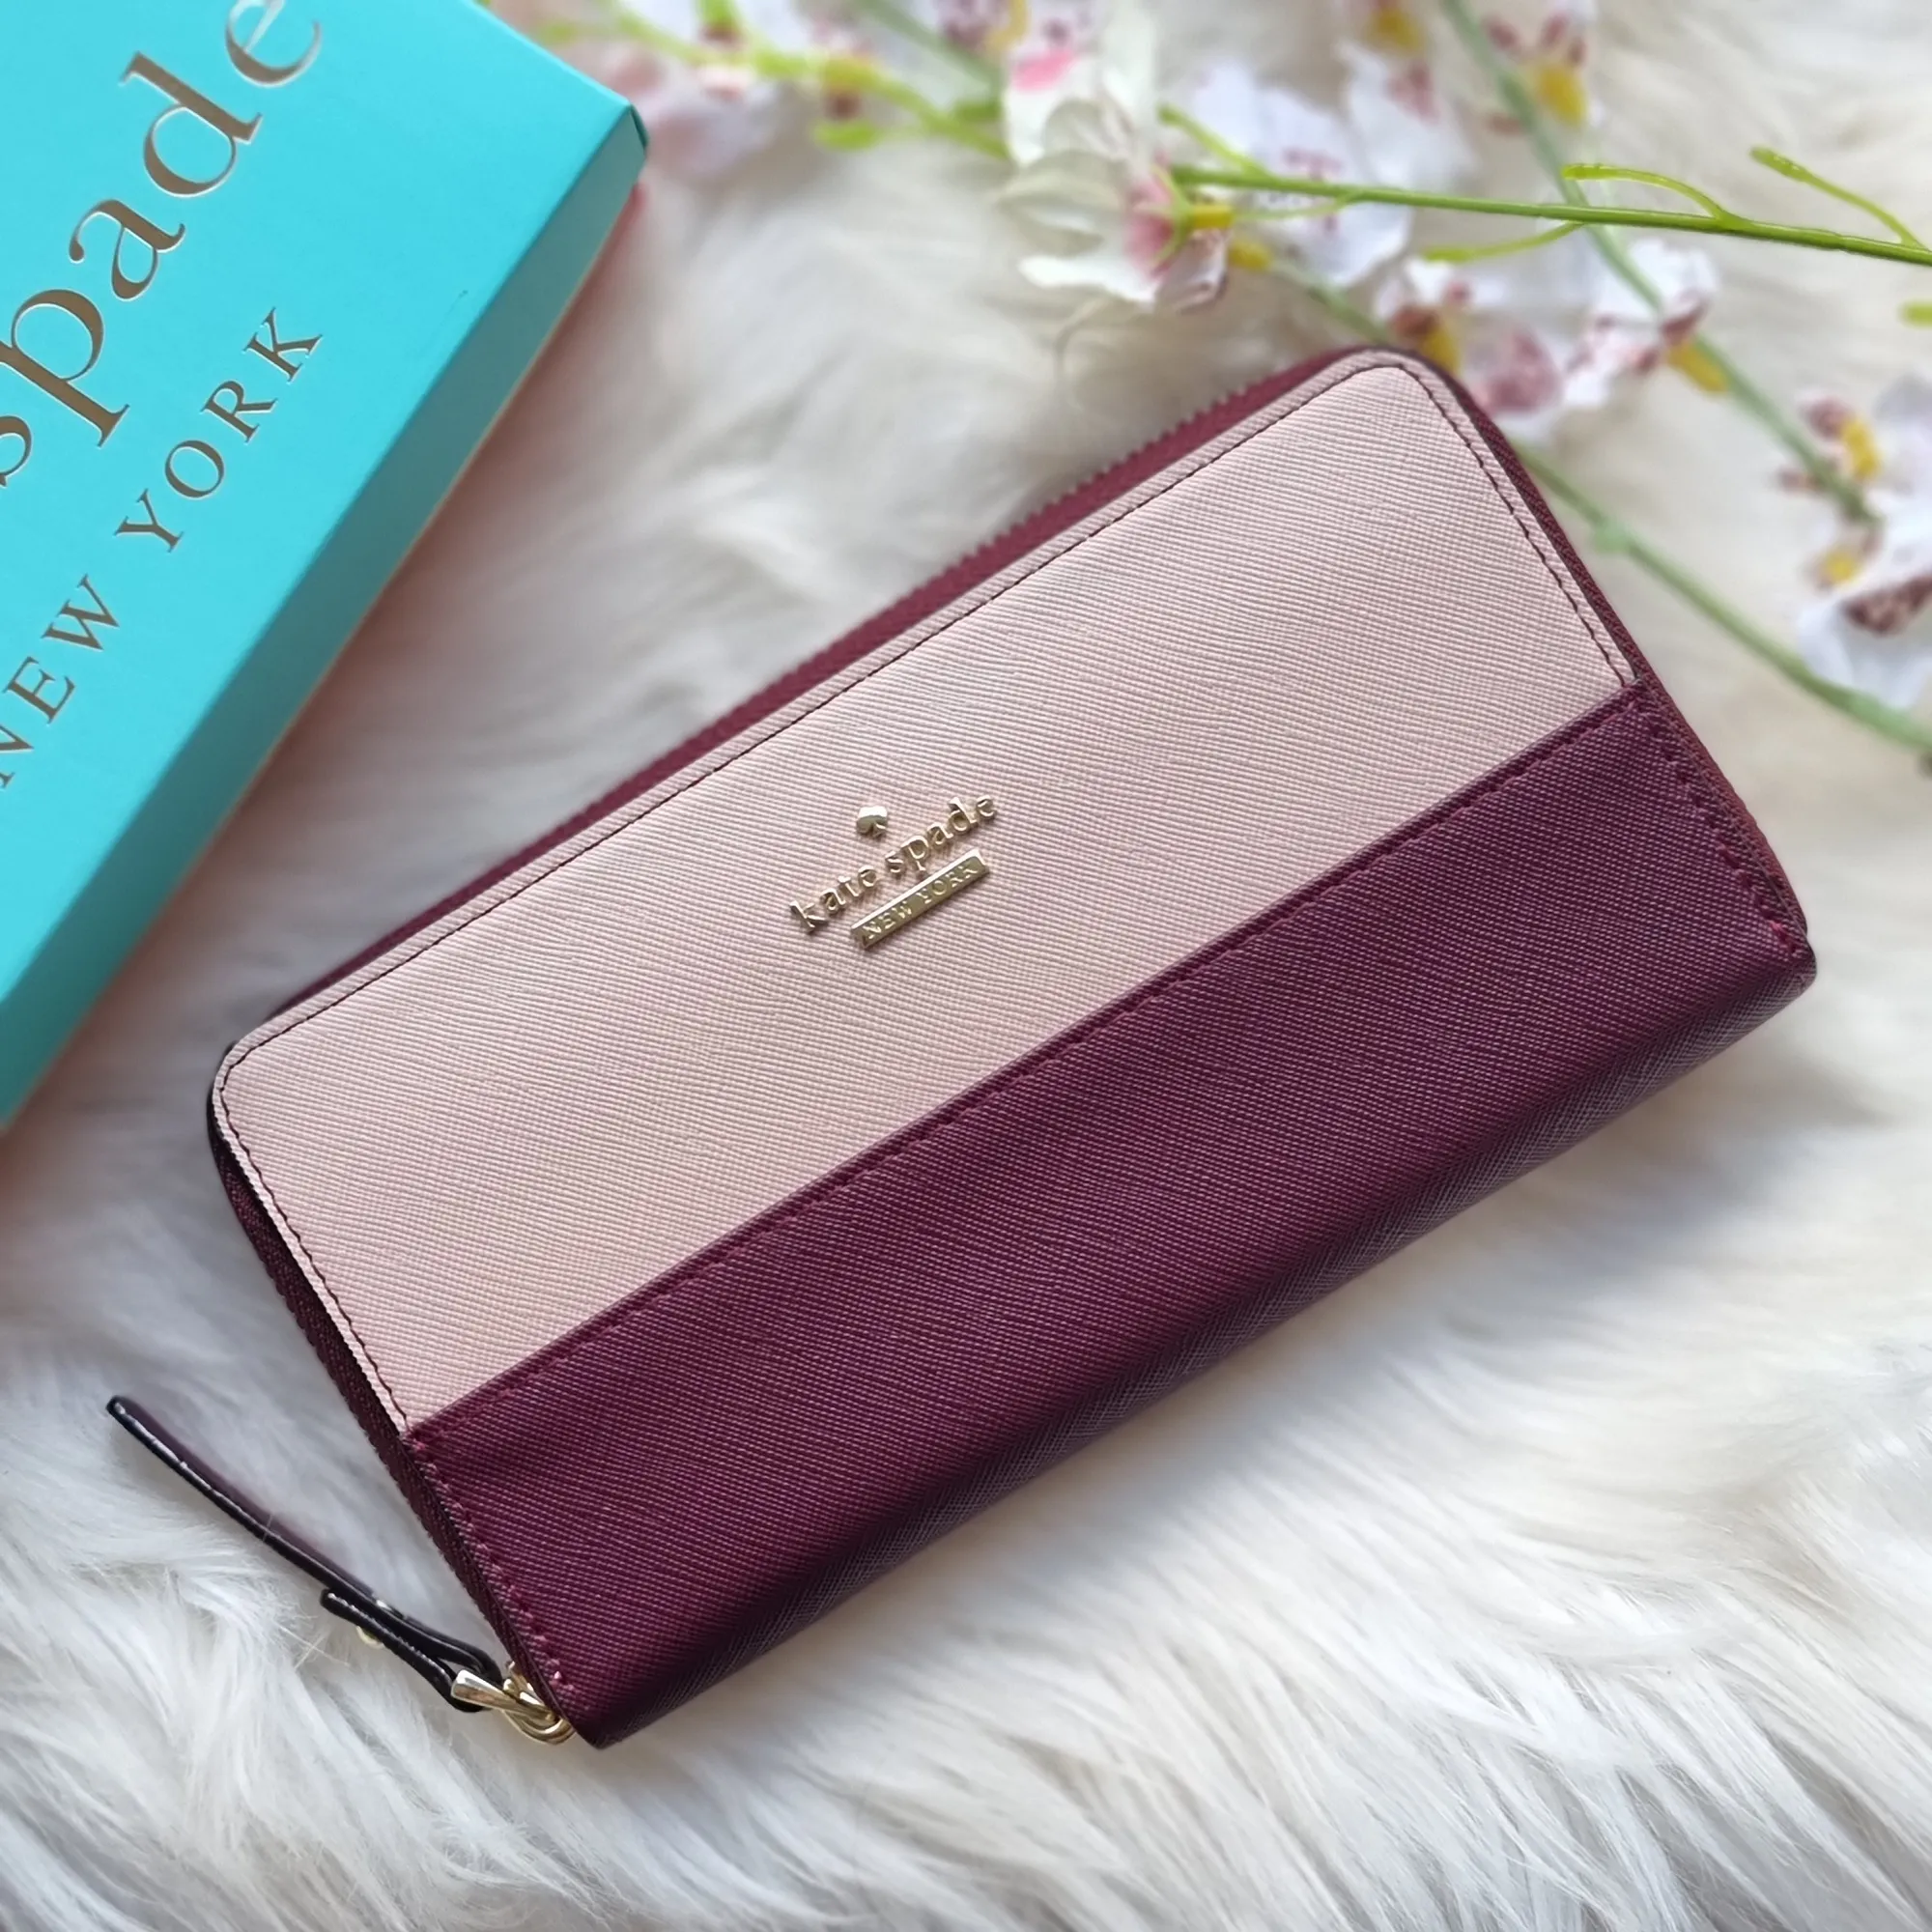 Guaranteed Authentic Kate Spade Saffiano Zip Around Leather Wallet -  Pink/Maroon | Lazada PH